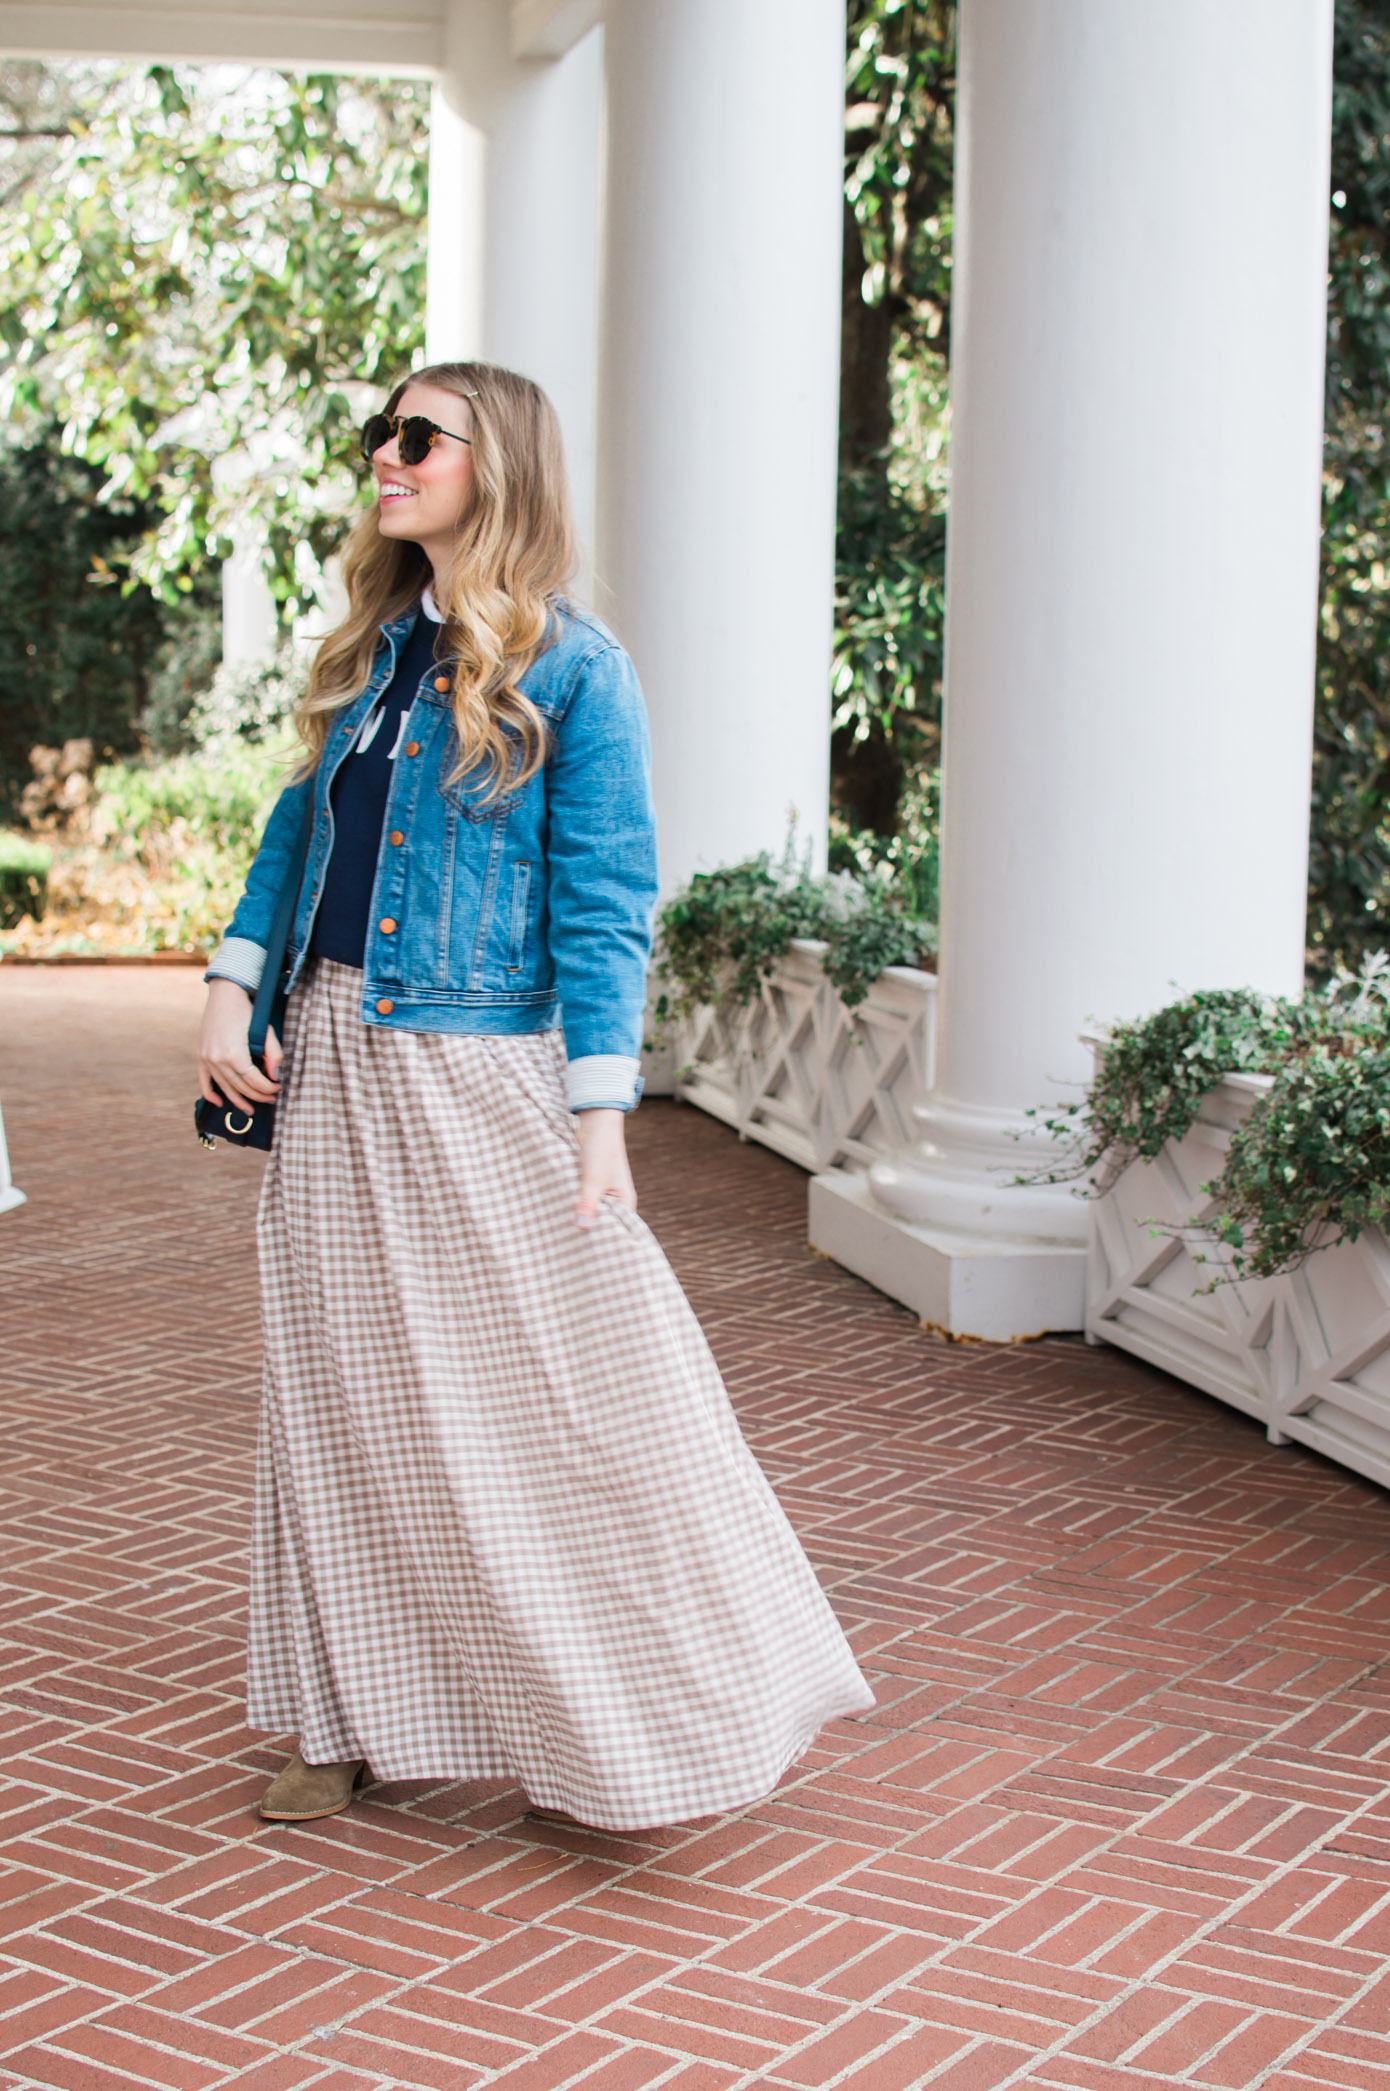 How to Style a Maxi Skirt for Winter | Casual Maxi Skirt | Louella Reese Life & Style Blog